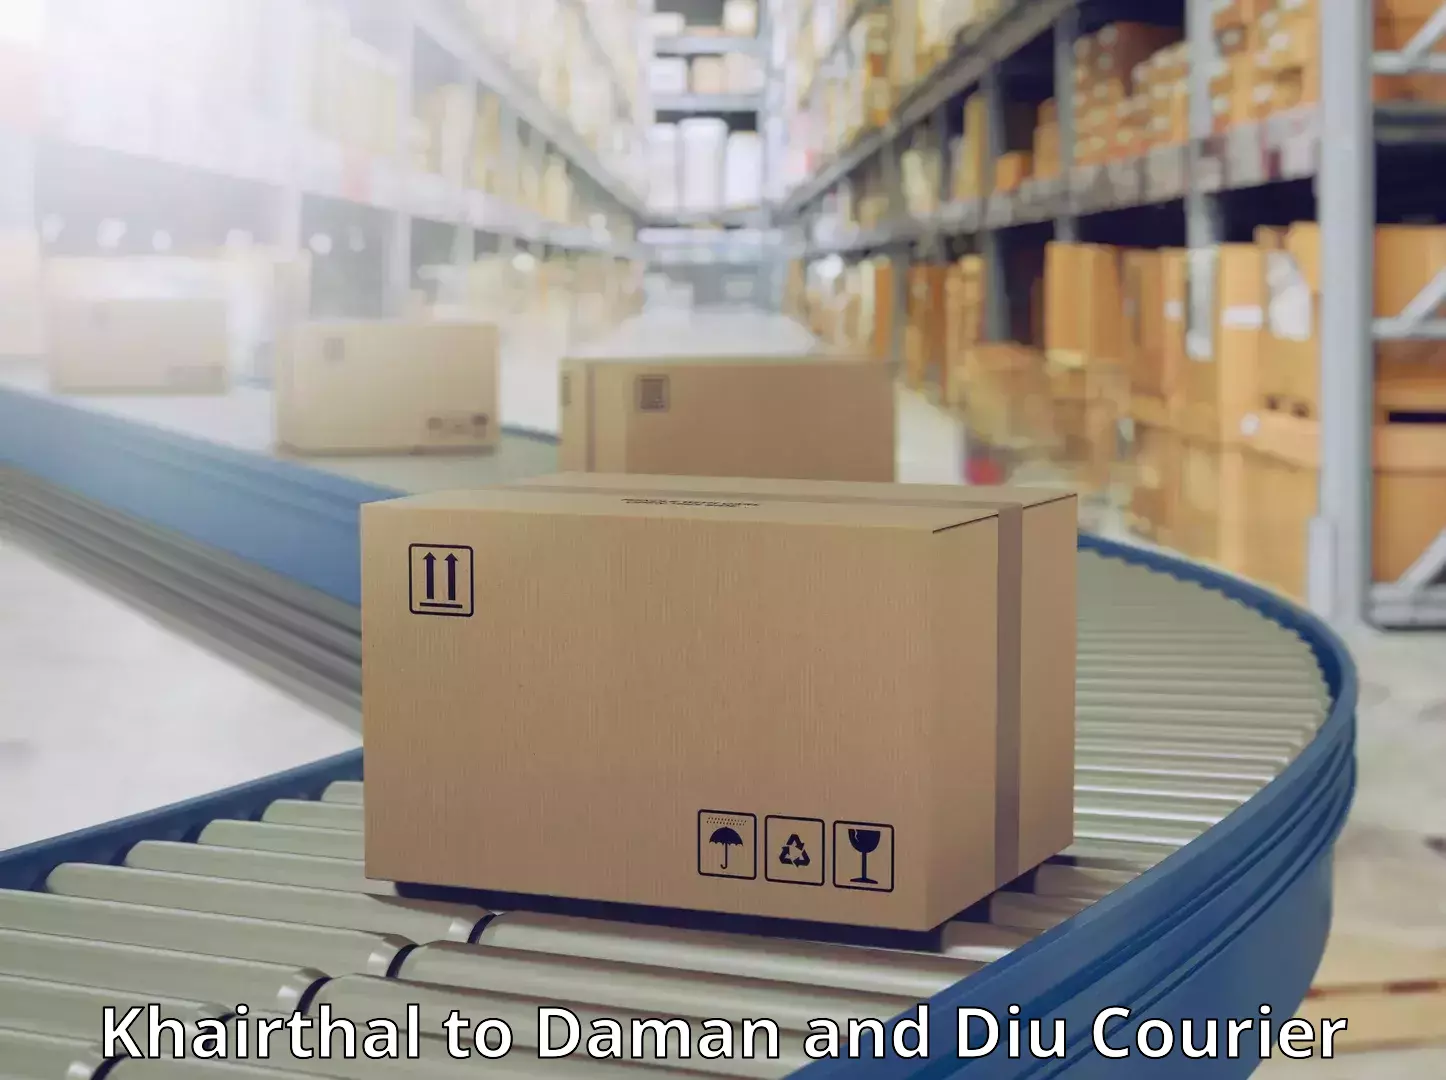 Round-the-clock parcel delivery Khairthal to Diu